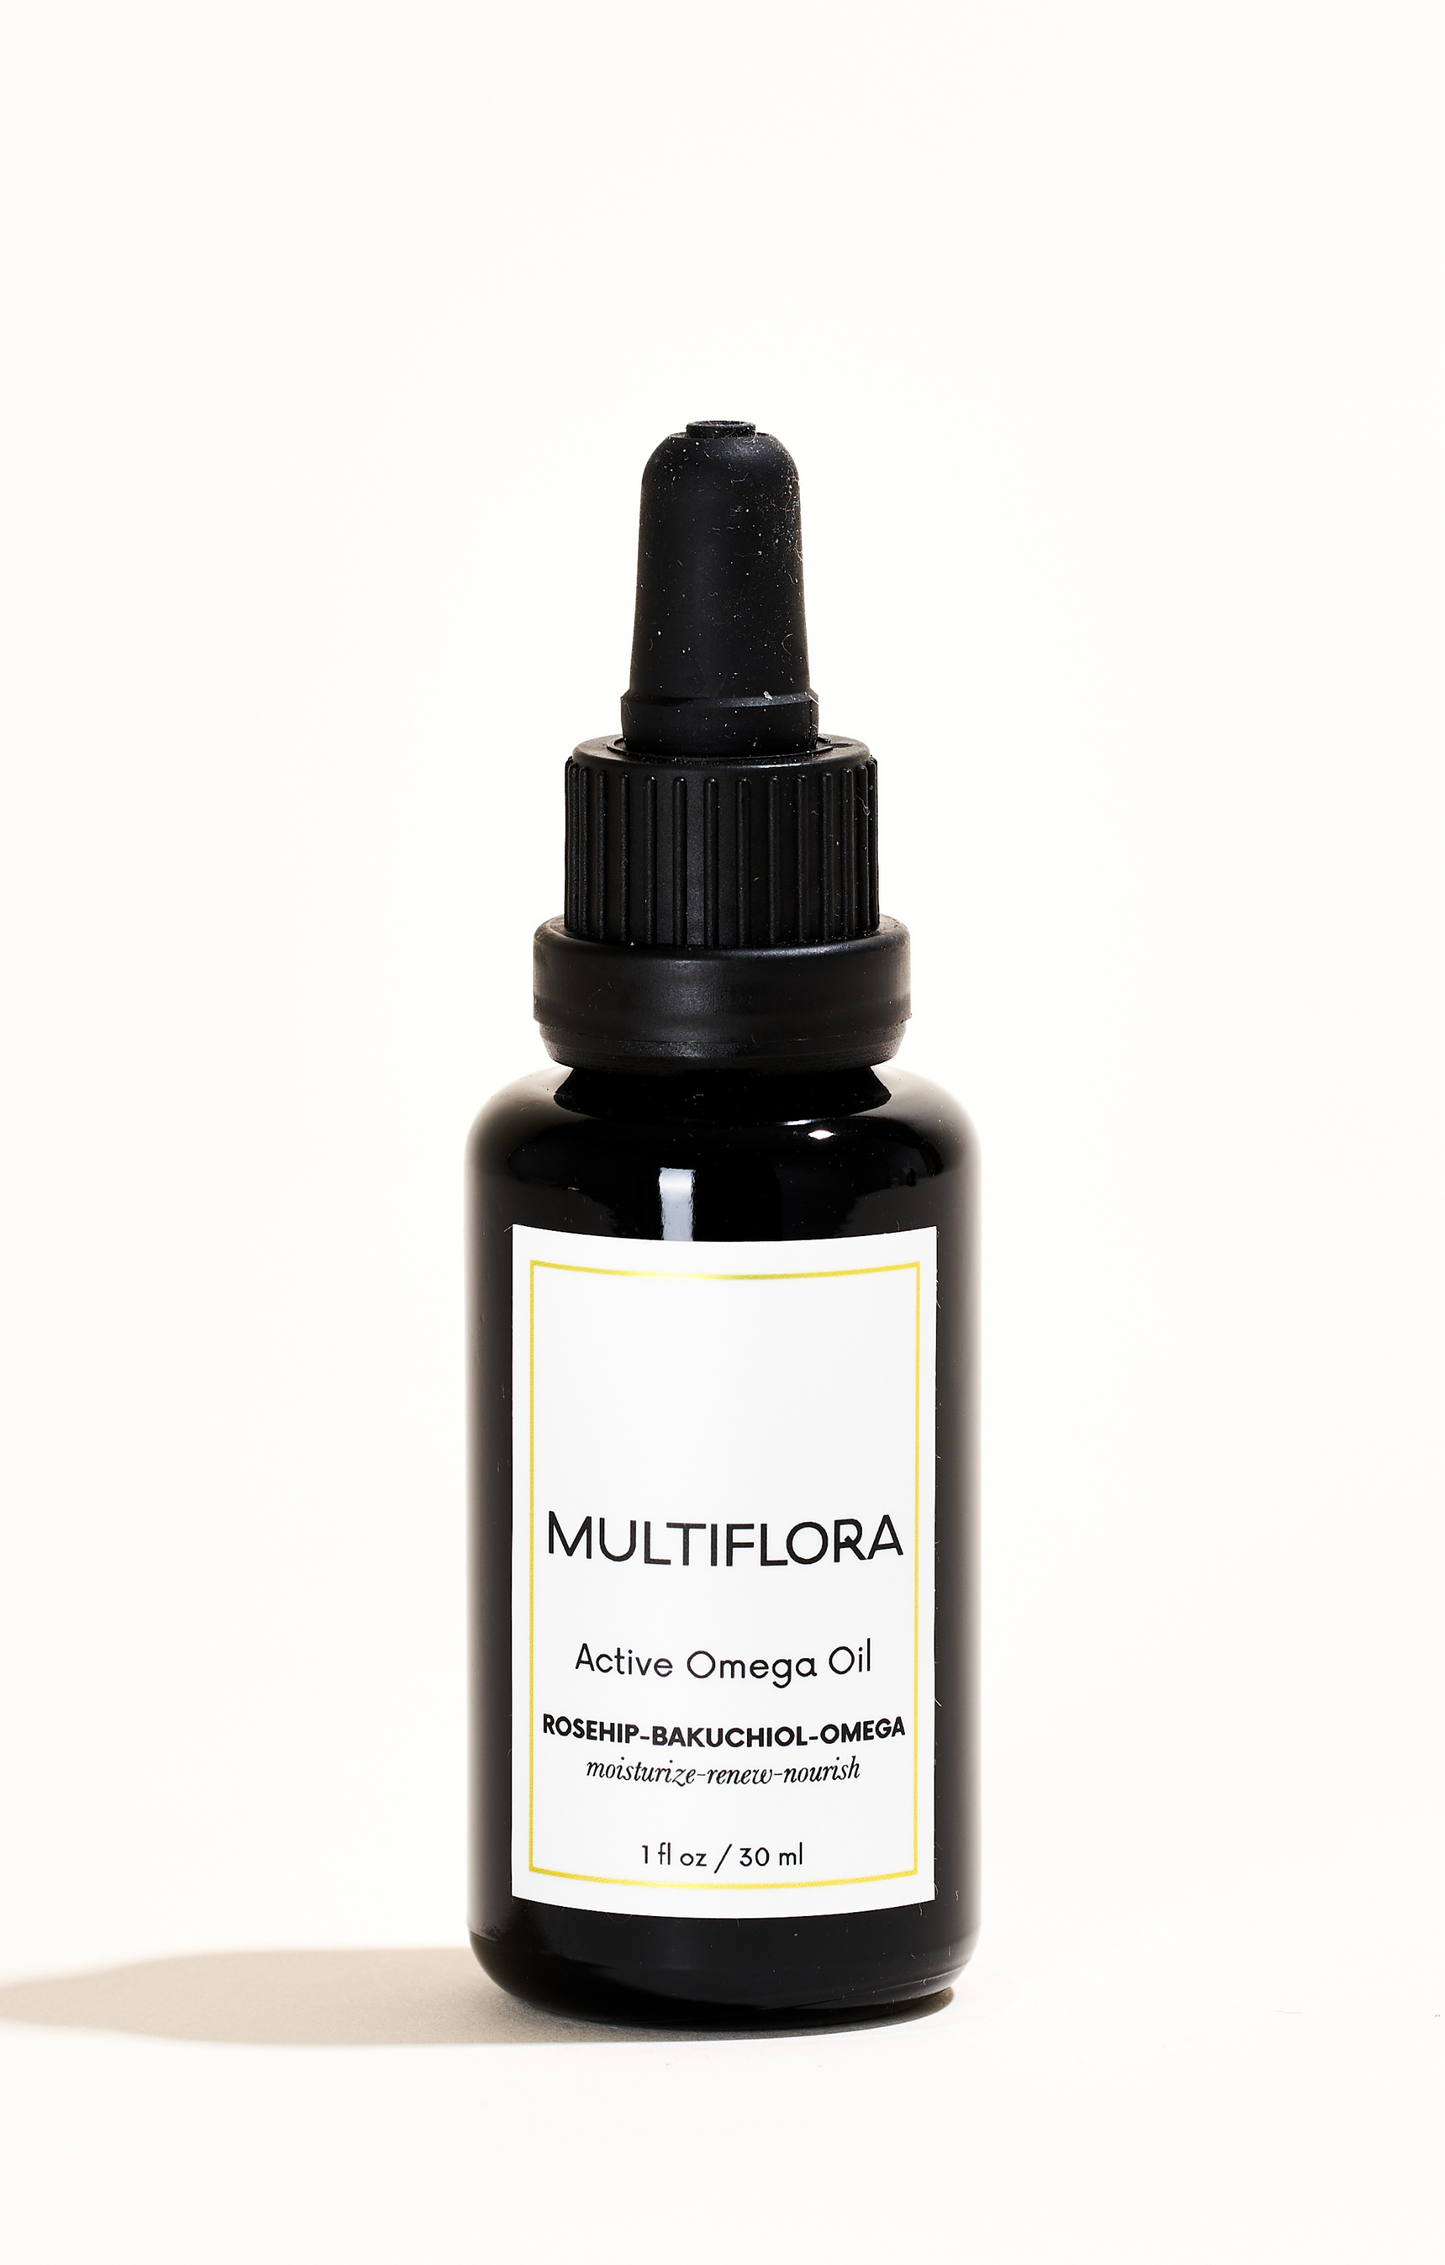 Rosehip oil product for mature and dry skin types. Contains organic rosehip oil, bakuchiol, and vitamin C